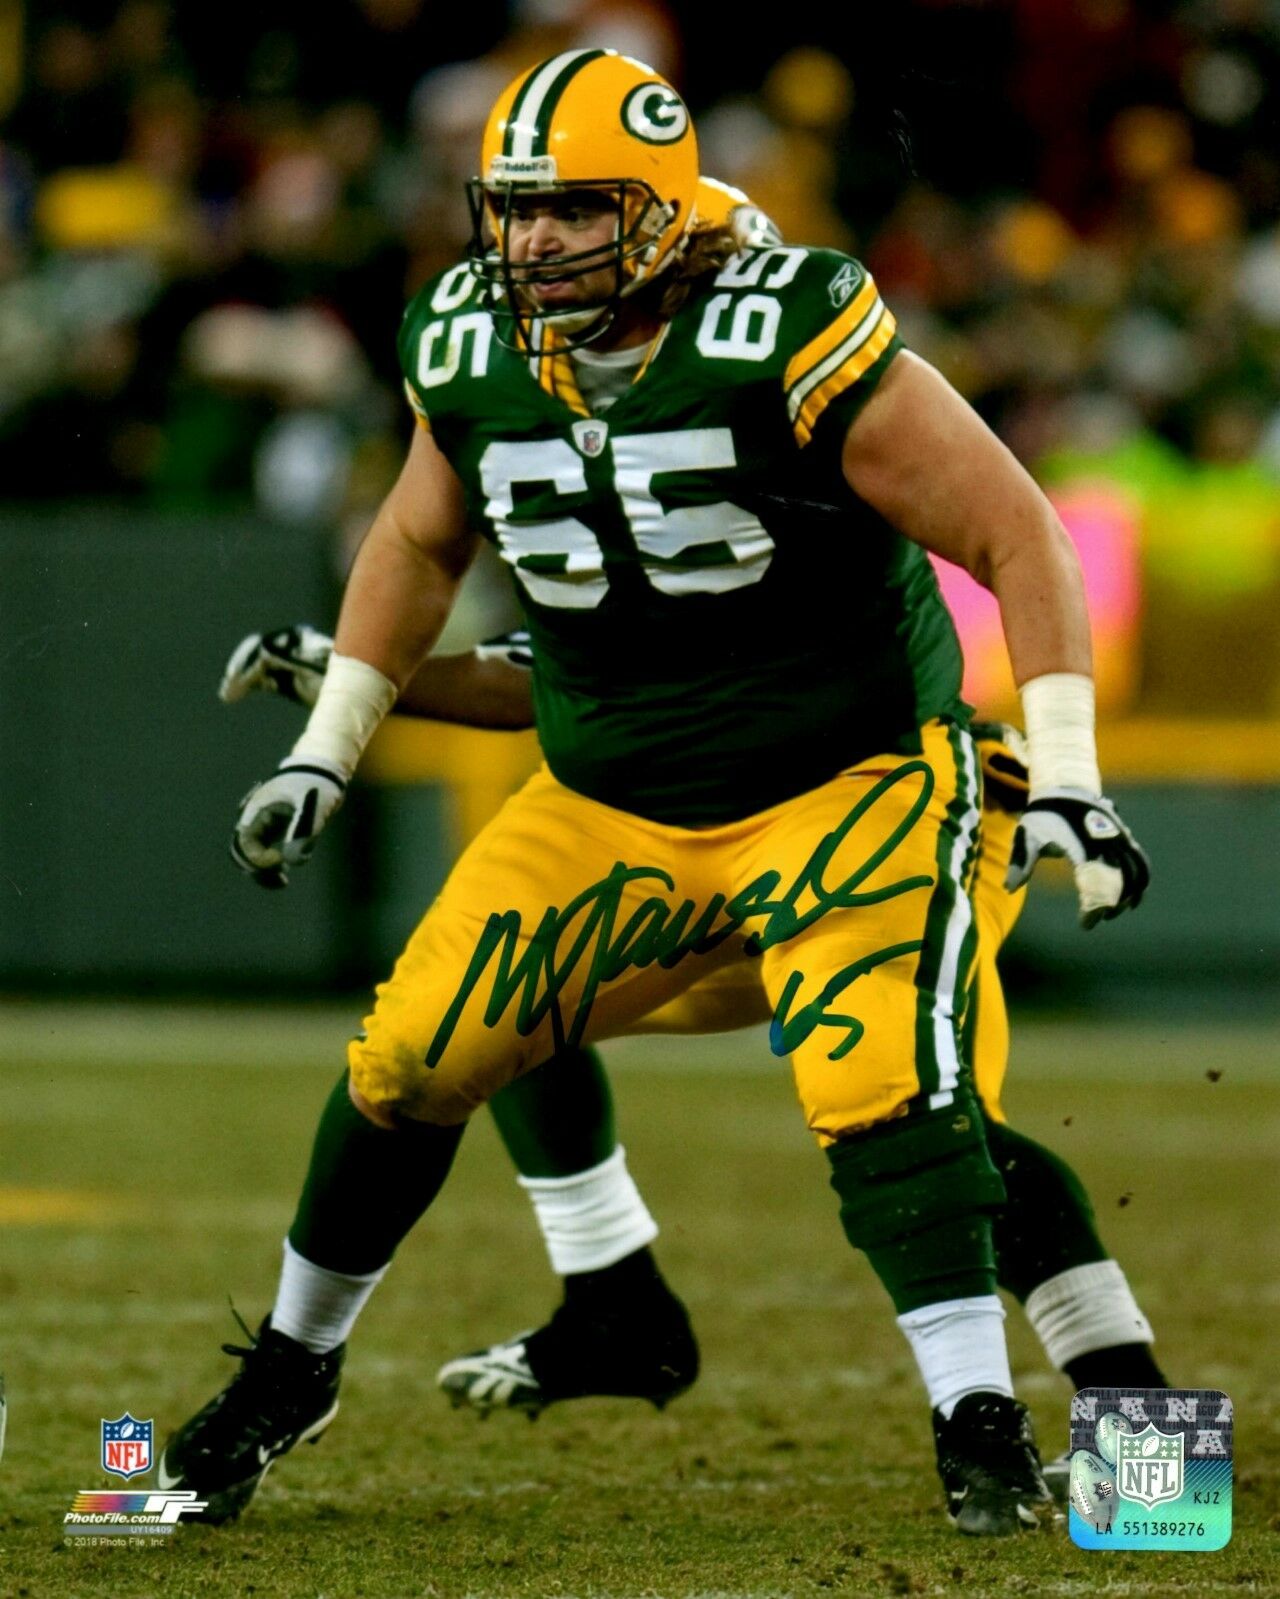 Packers Mark Tauscher Signed 8x10 Photo #1 Auto - Sb Xlv Champ - Badgers